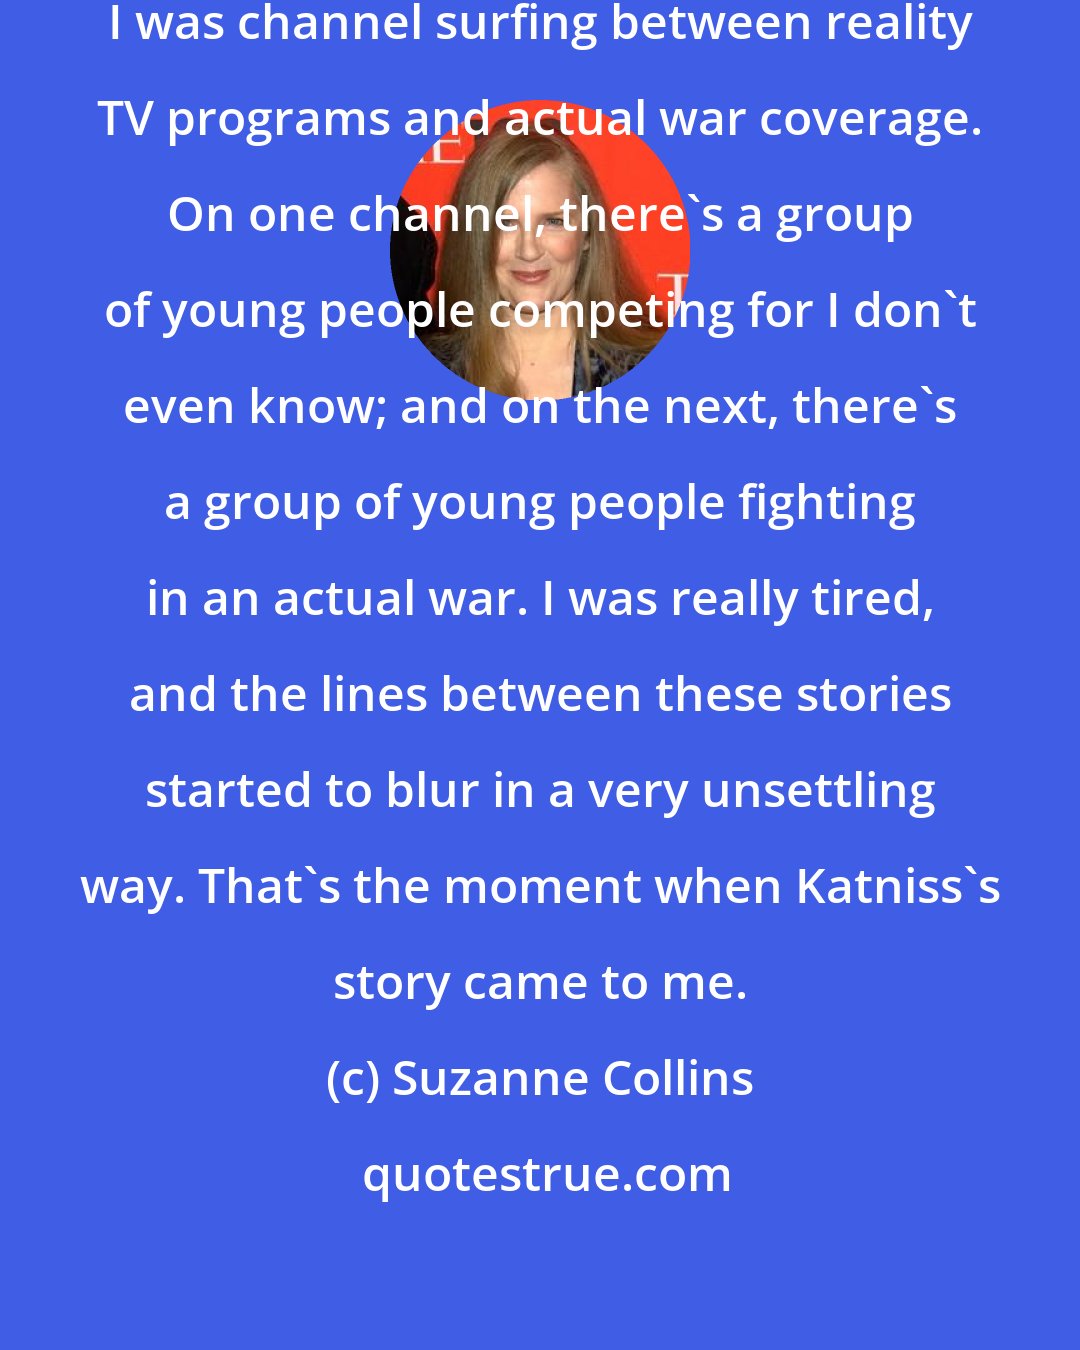 Suzanne Collins: One night, I was lying in bed, and I was channel surfing between reality TV programs and actual war coverage. On one channel, there's a group of young people competing for I don't even know; and on the next, there's a group of young people fighting in an actual war. I was really tired, and the lines between these stories started to blur in a very unsettling way. That's the moment when Katniss's story came to me.